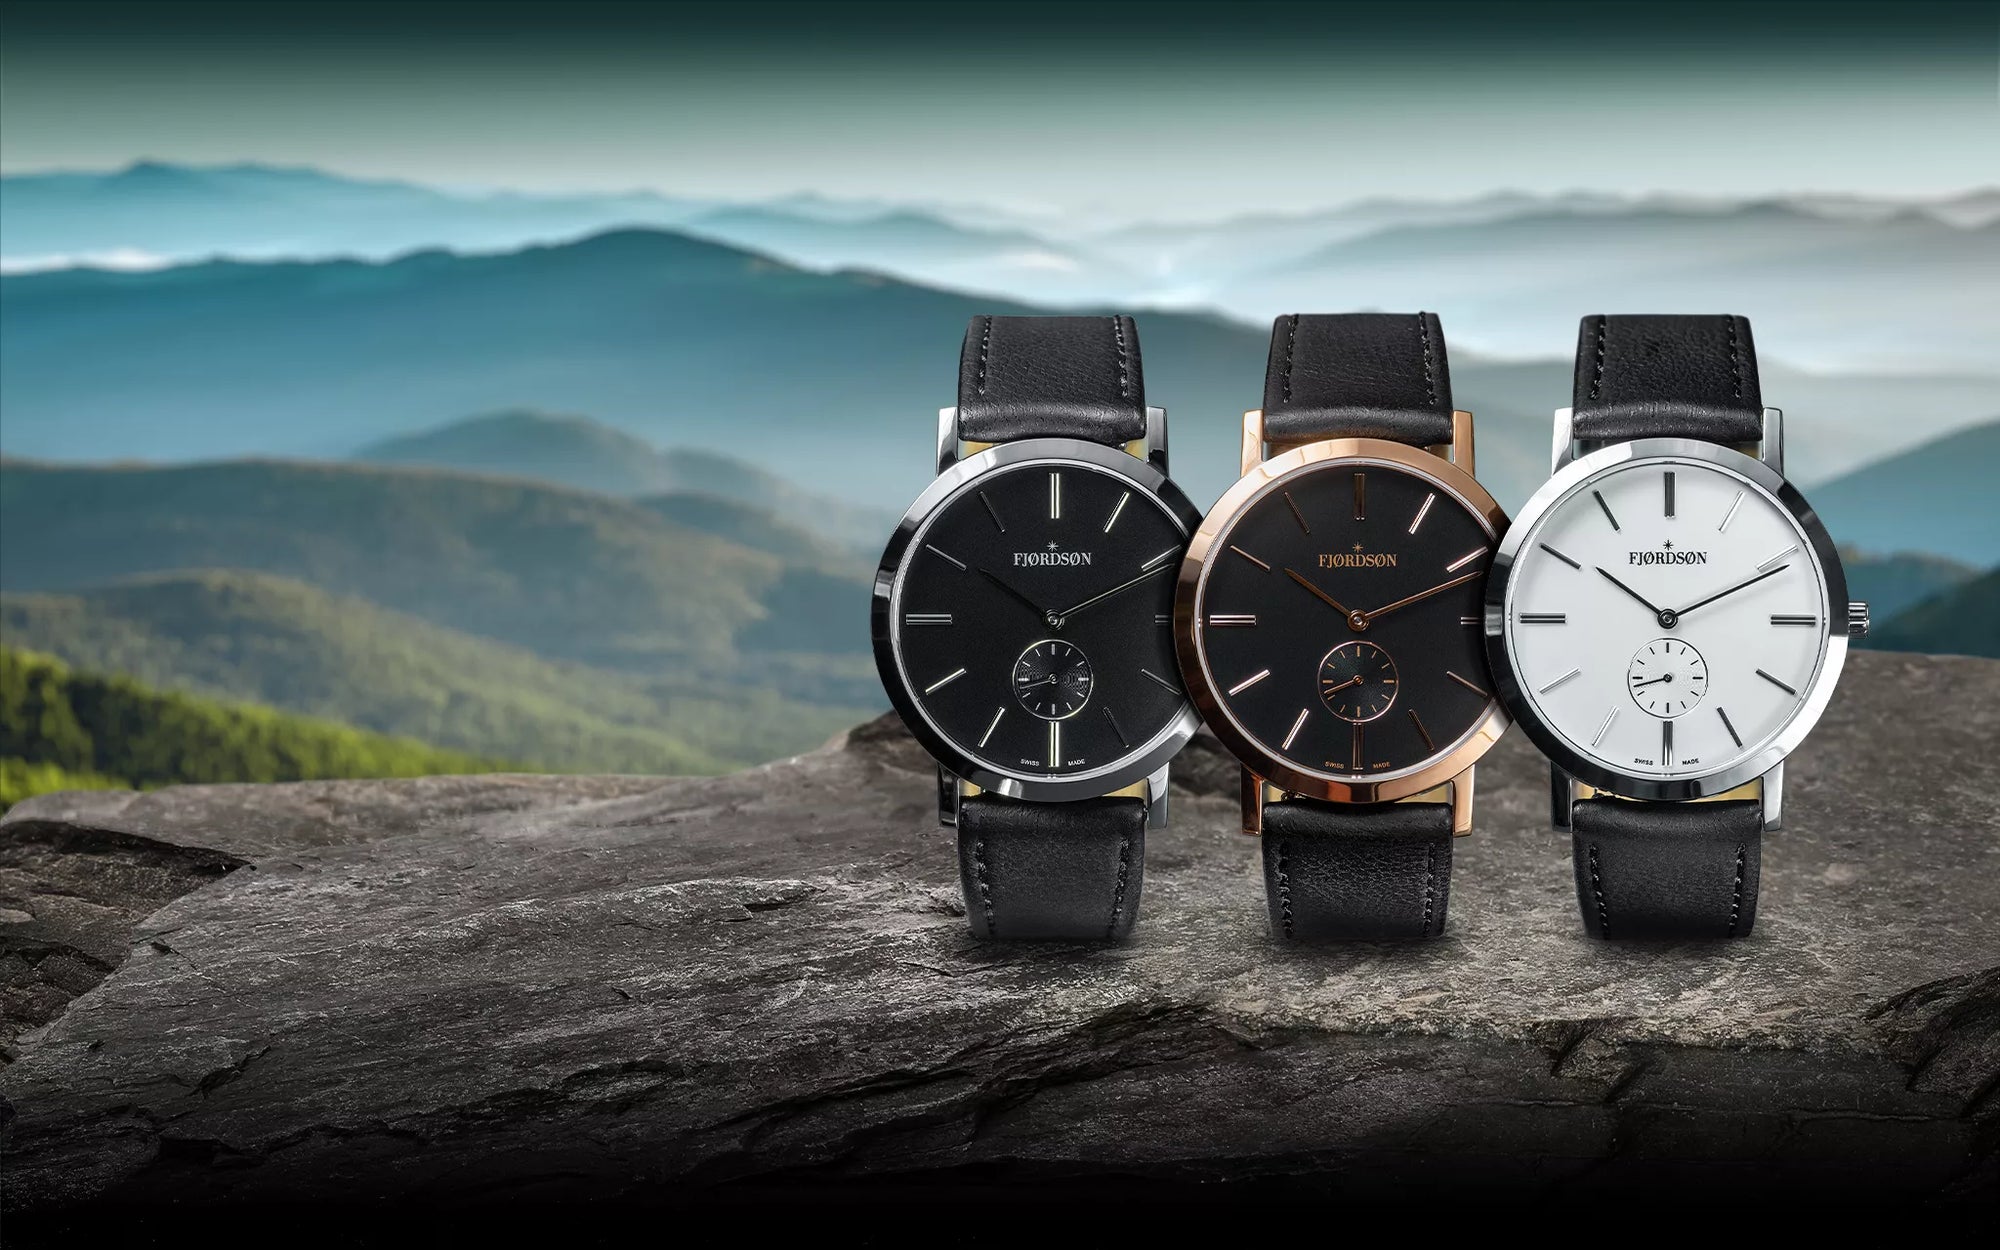 3 Fjordson #SLIM collection watches - 1. Black dial - silver | 2. Black dial - rose gold | 3. white dial - silver with vegan leather straps. Shot in a moody mountain area.